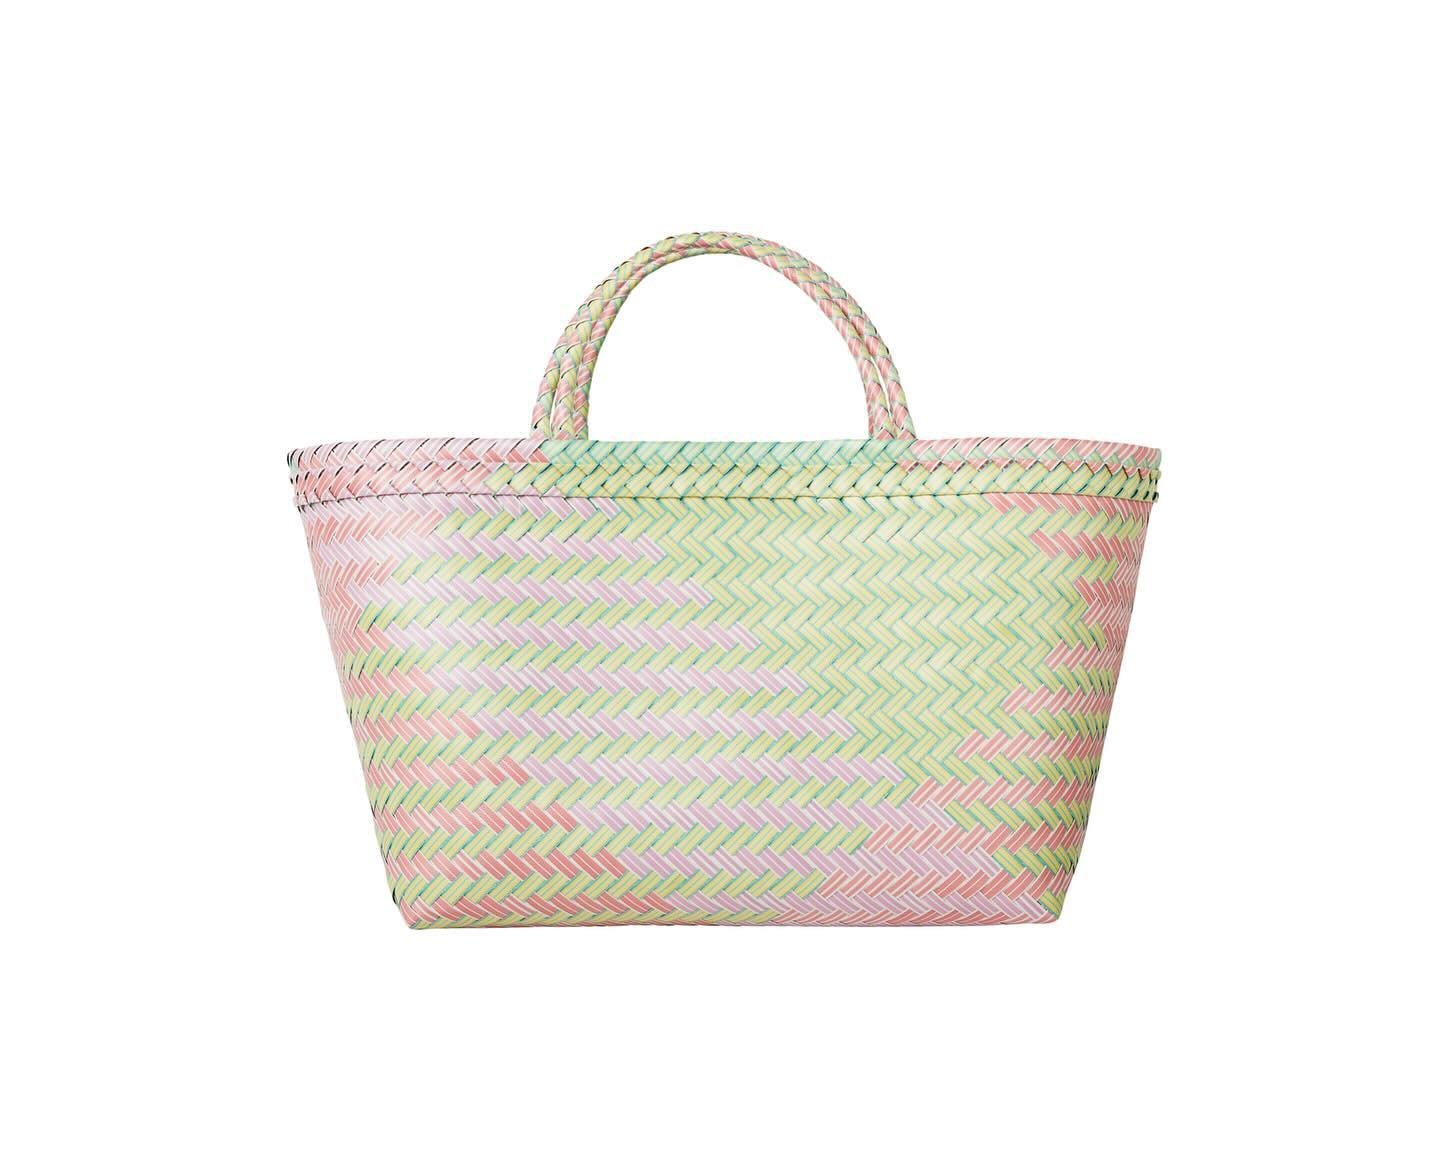 Crafted with sustainability in mind and skillfully handwoven from recycled plastic. 

This is the Benny Tote in Pink Multi, Blue Multi, and Blue 🛍️ Take advantage of our 20% off all recycled bags in store and online!

Lightweight and spacious, this 